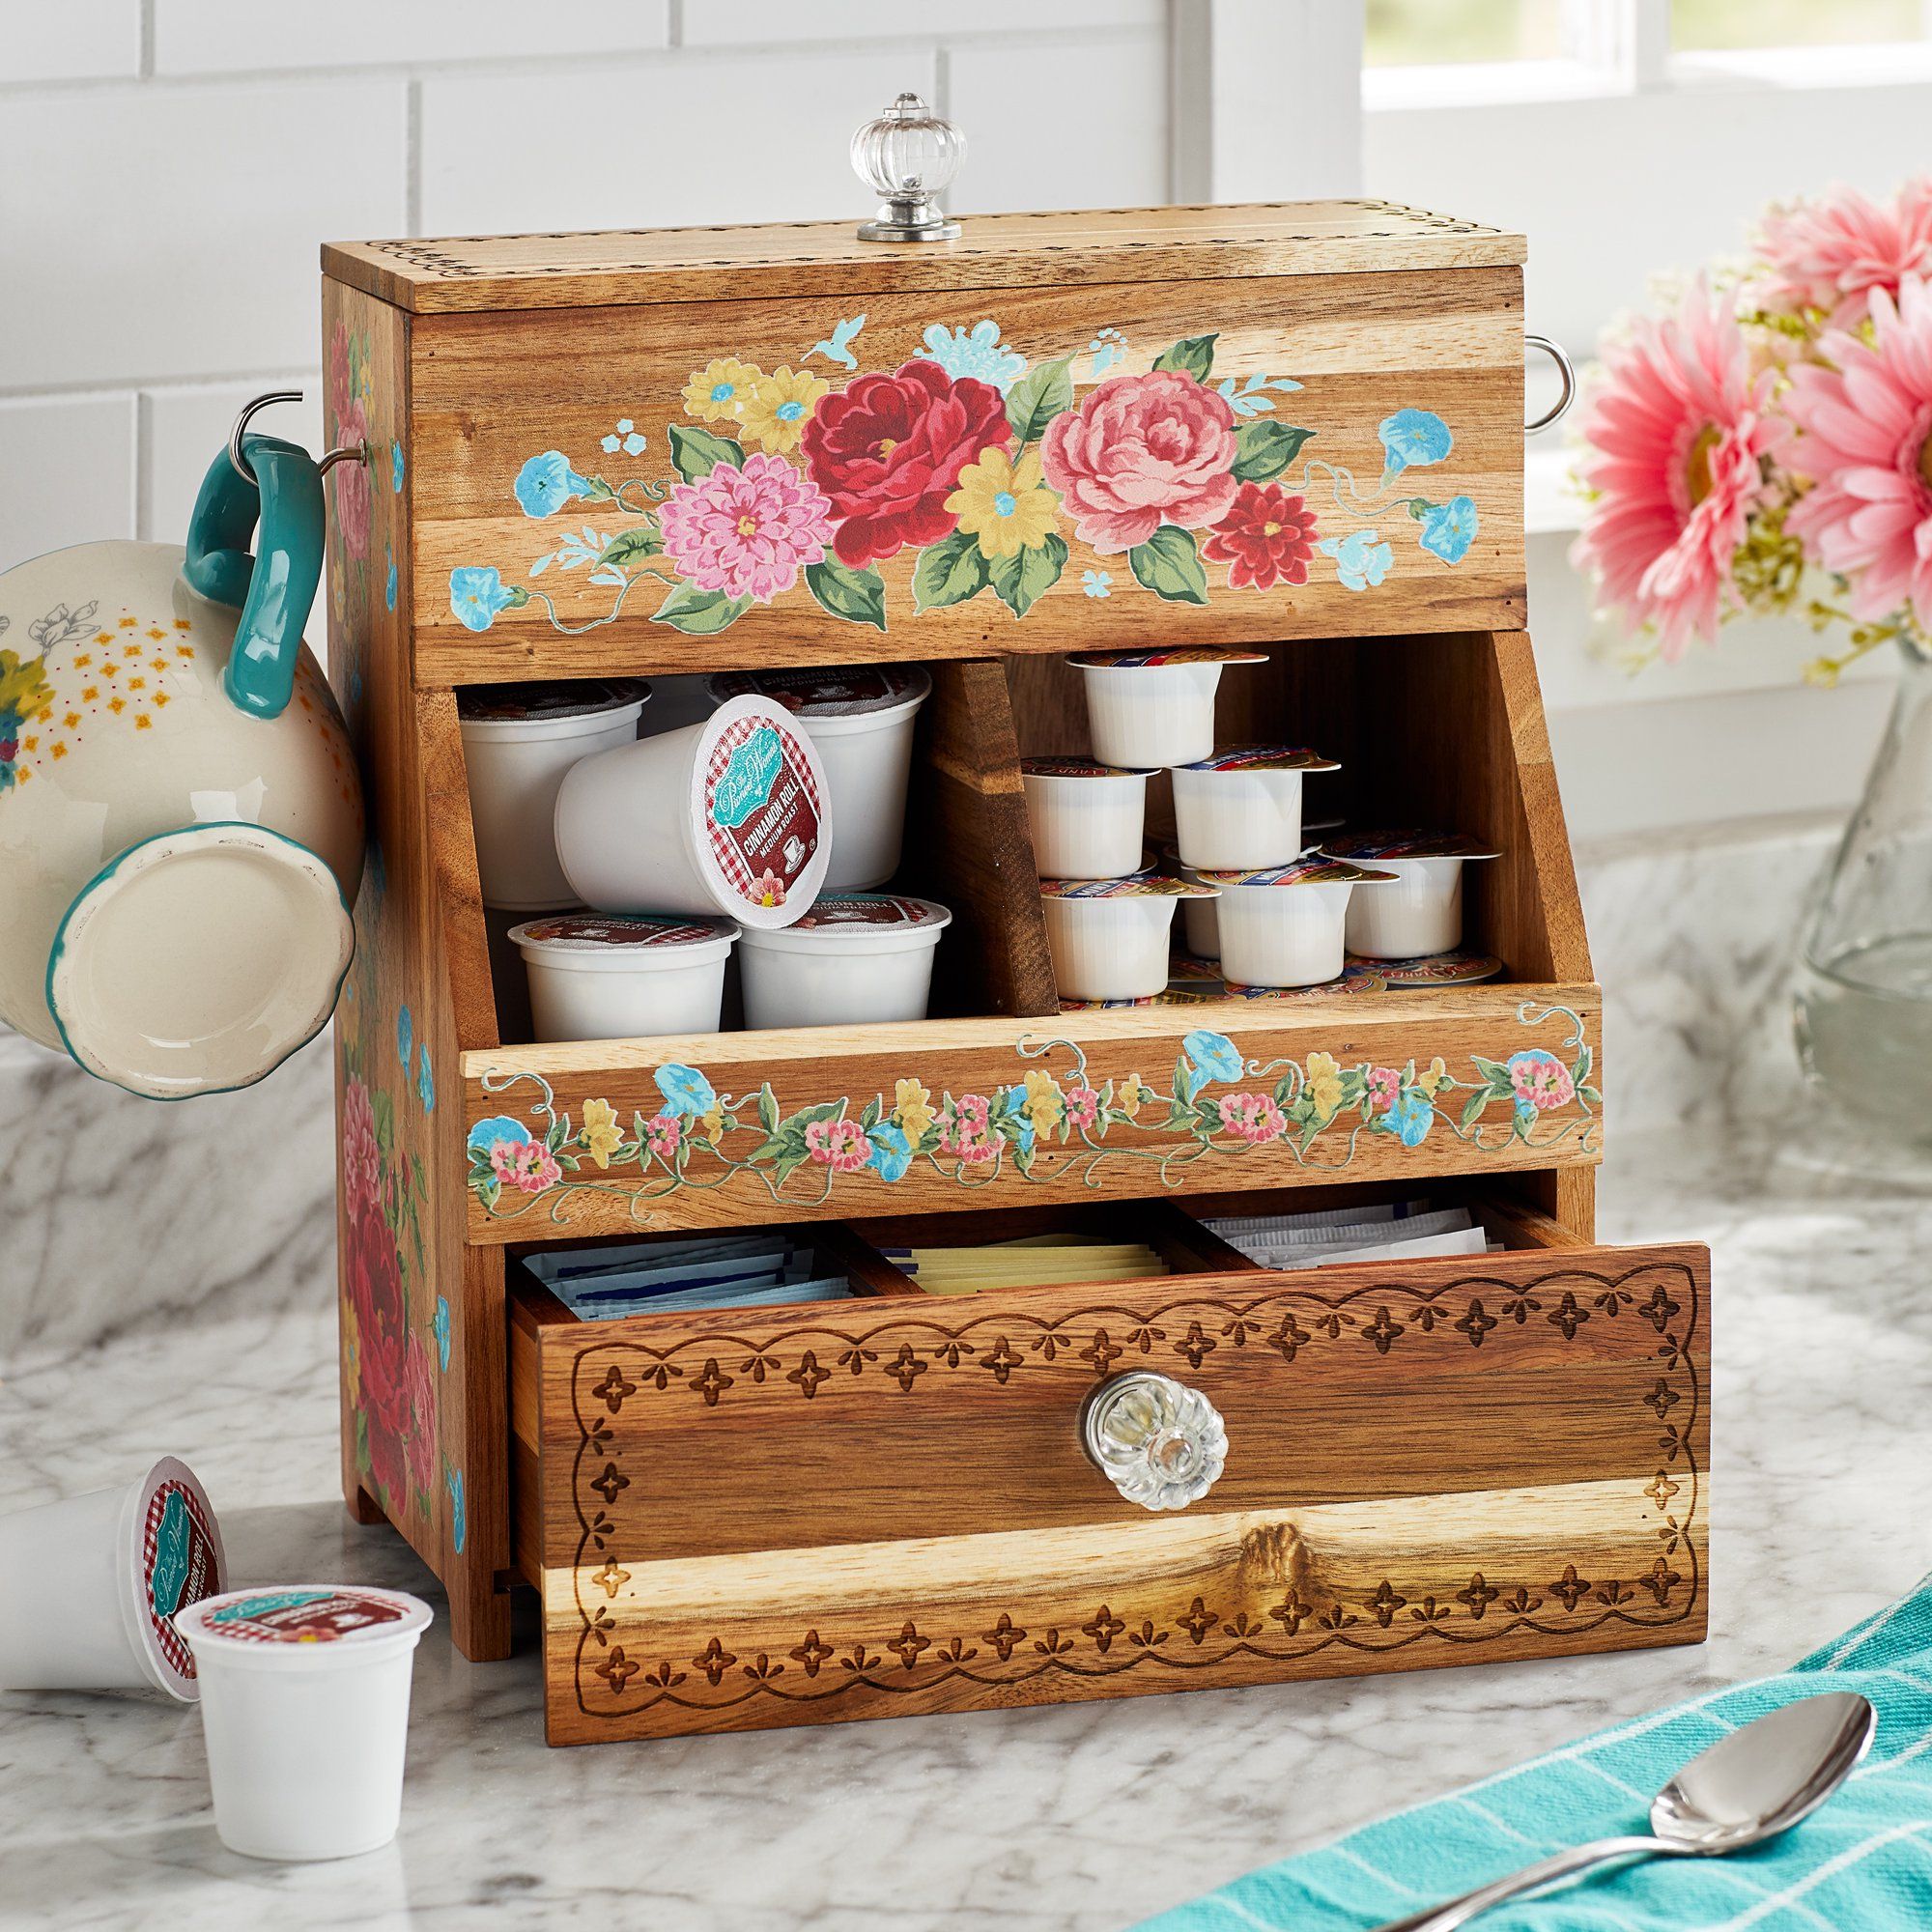 https://hips.hearstapps.com/hmg-prod/images/the-pioneer-woman-coffee-organizer-1636492545.jpeg